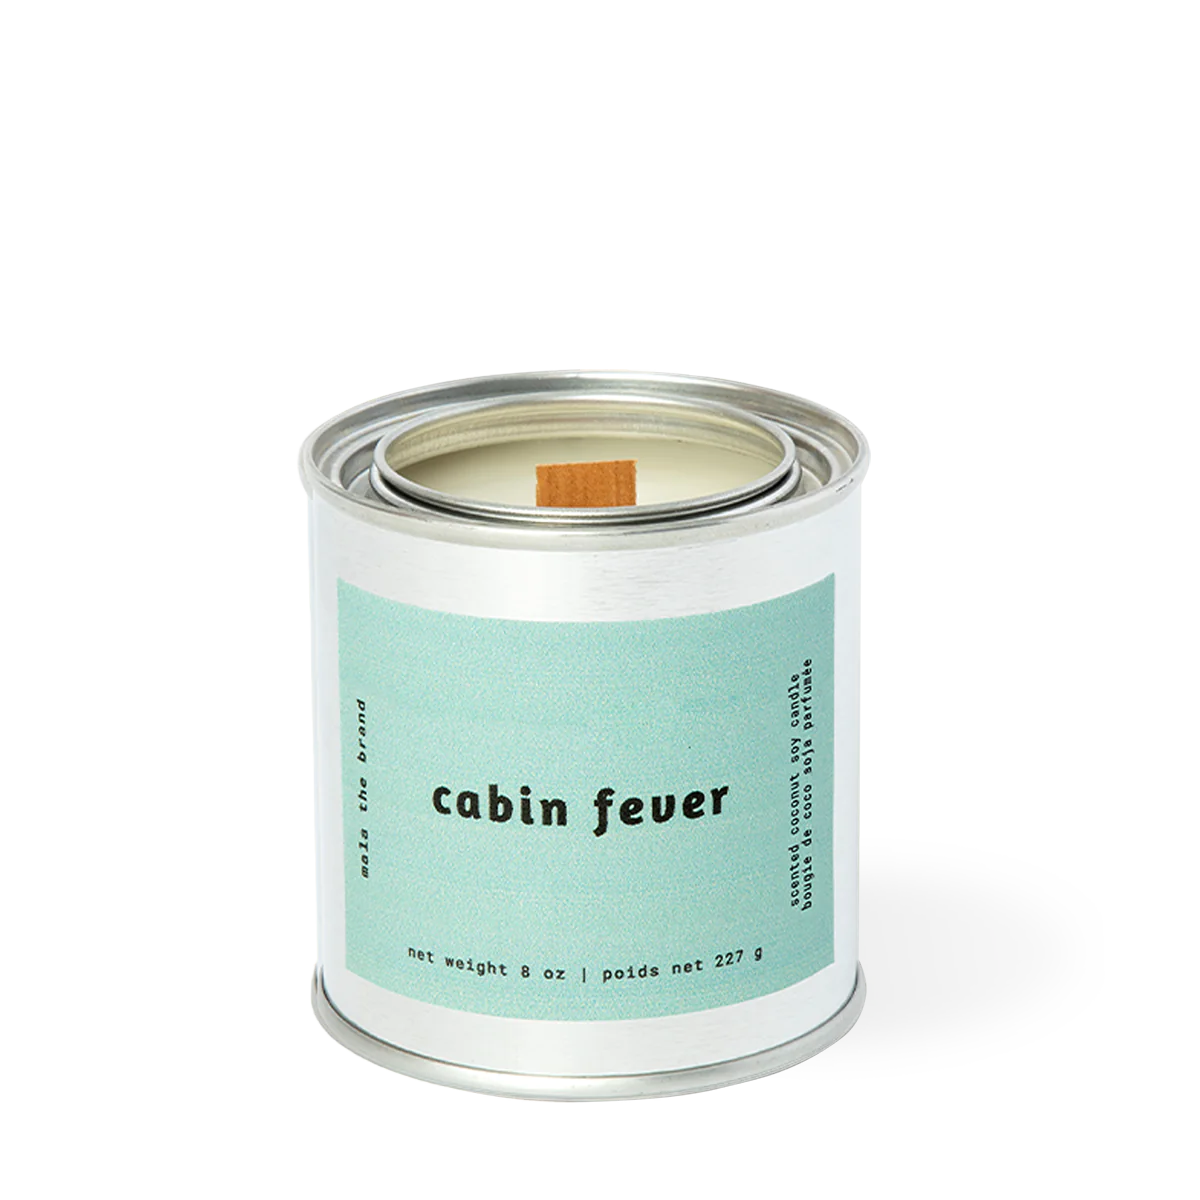 Mala The Brand - Cabin Fever Candle